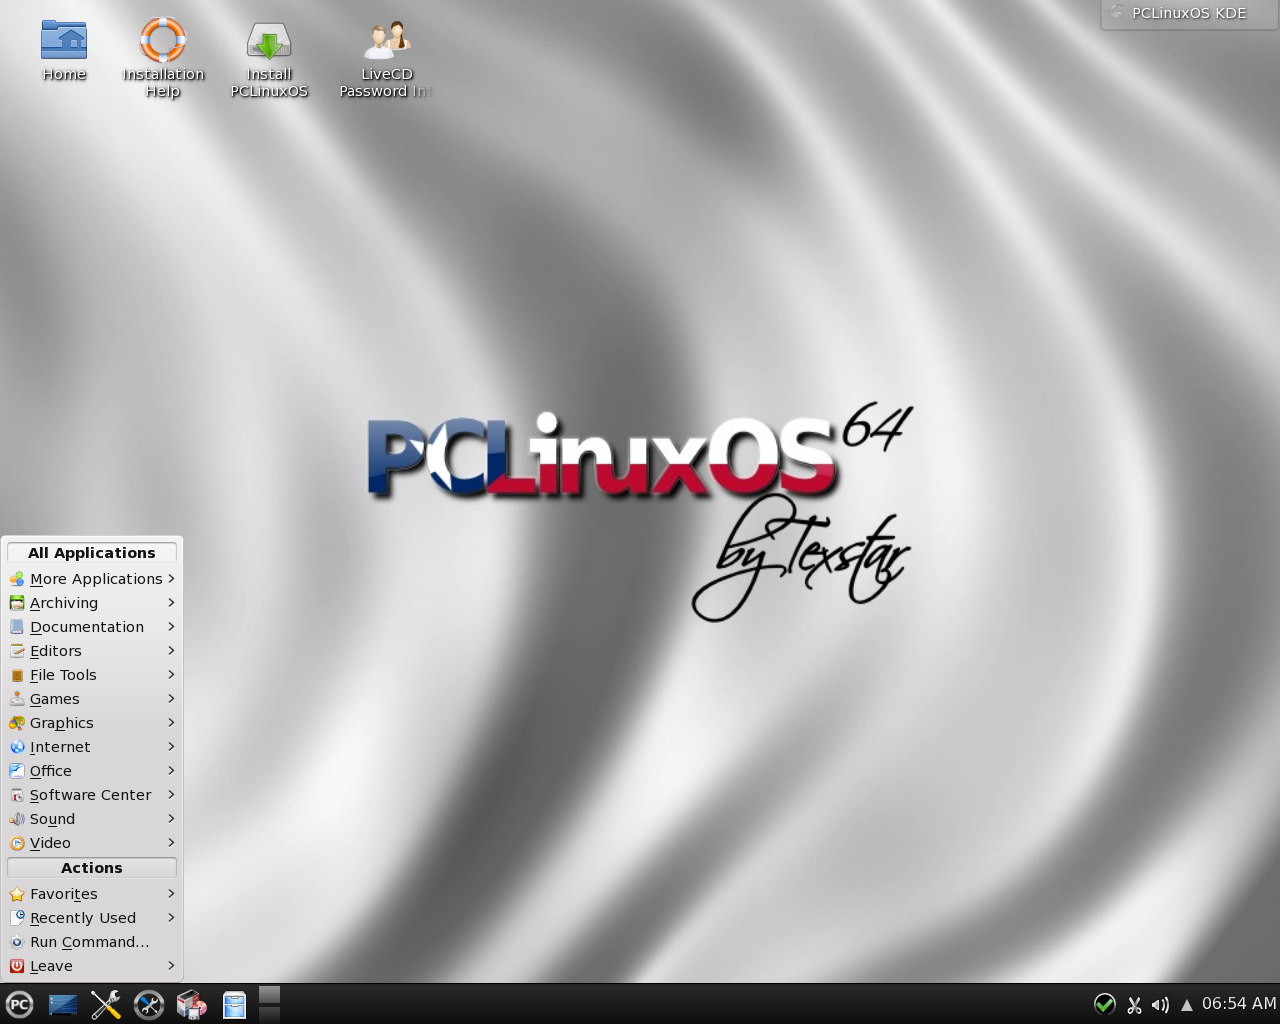 Install Pc Linux Os